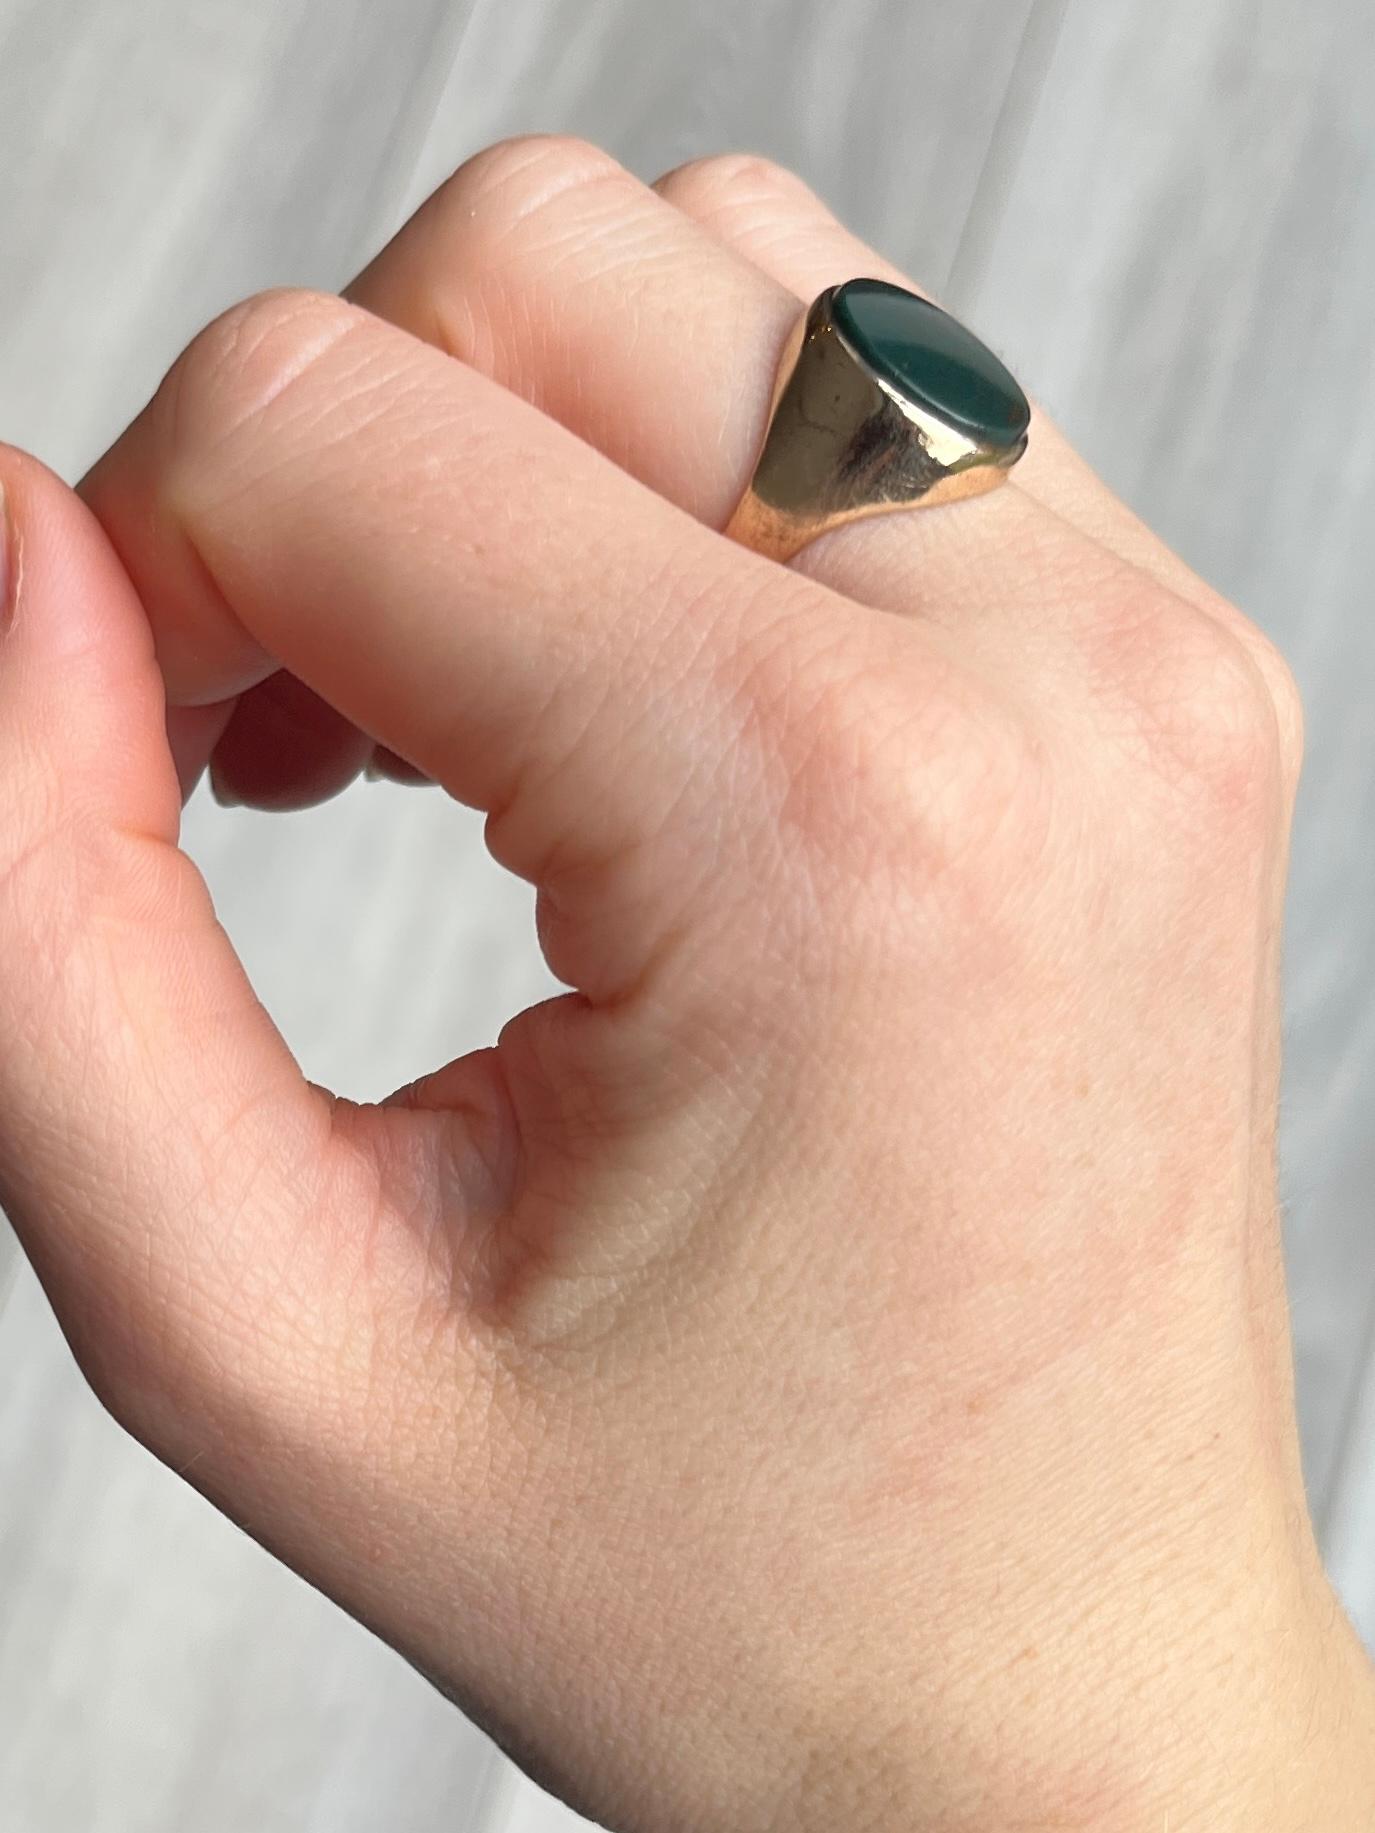 This gorgeous signet ring has a bloodstone set flush within the 9carat gold band. The stone is deep green with flecks of red running through. Hallmarked London.

Ring Size: N or 6 3/4
Stone dimensions: 14x12mm 

Weight: 4.5g 